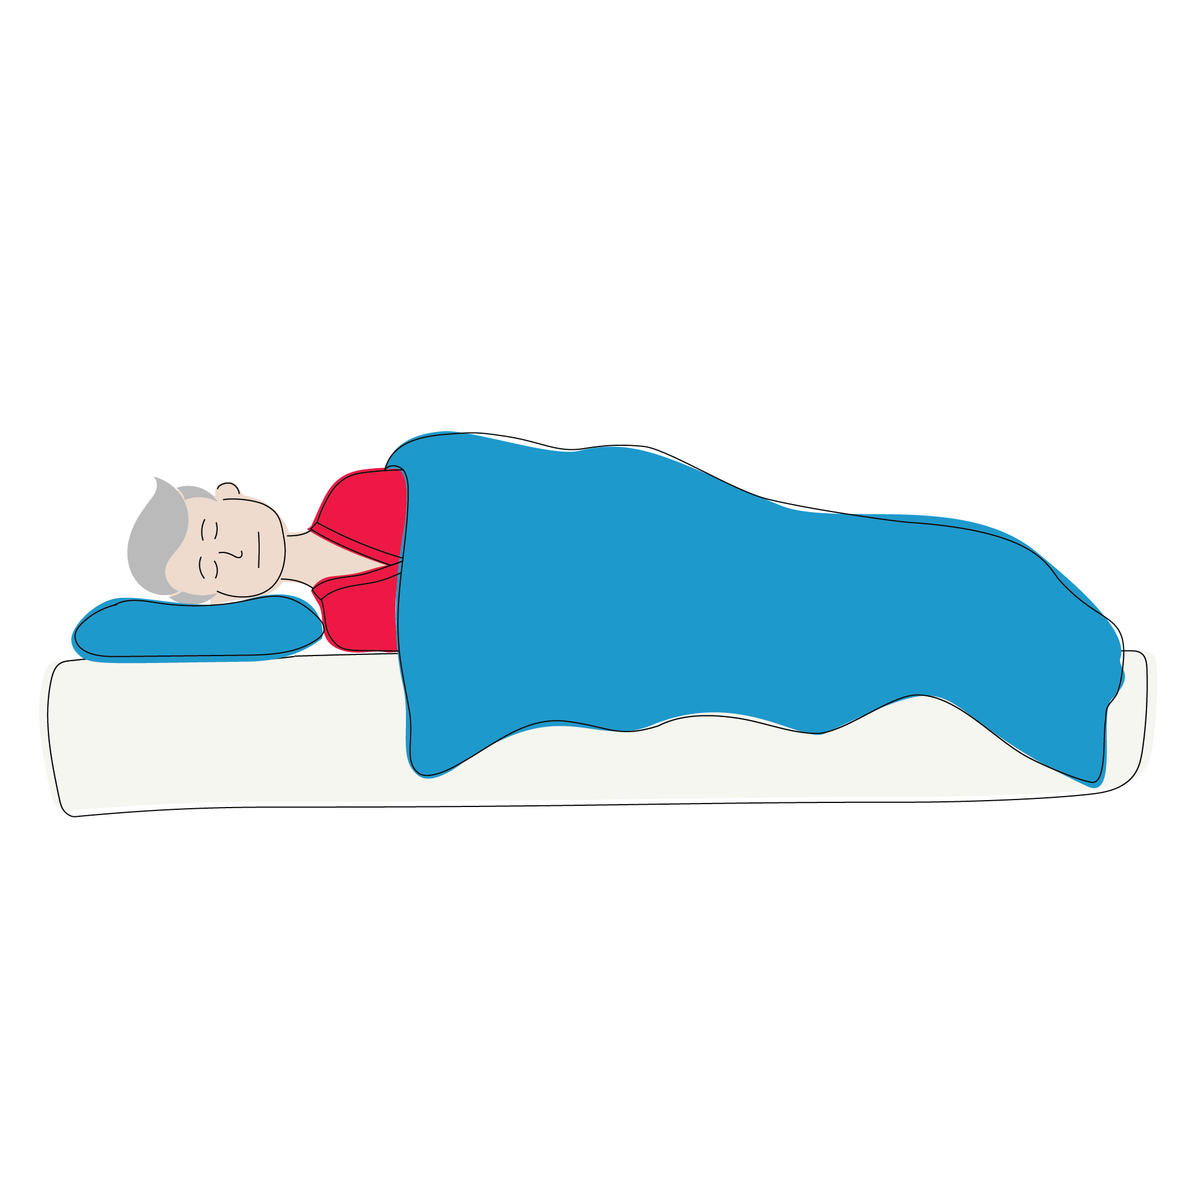 A graphic of a man sleeping in the fetal position